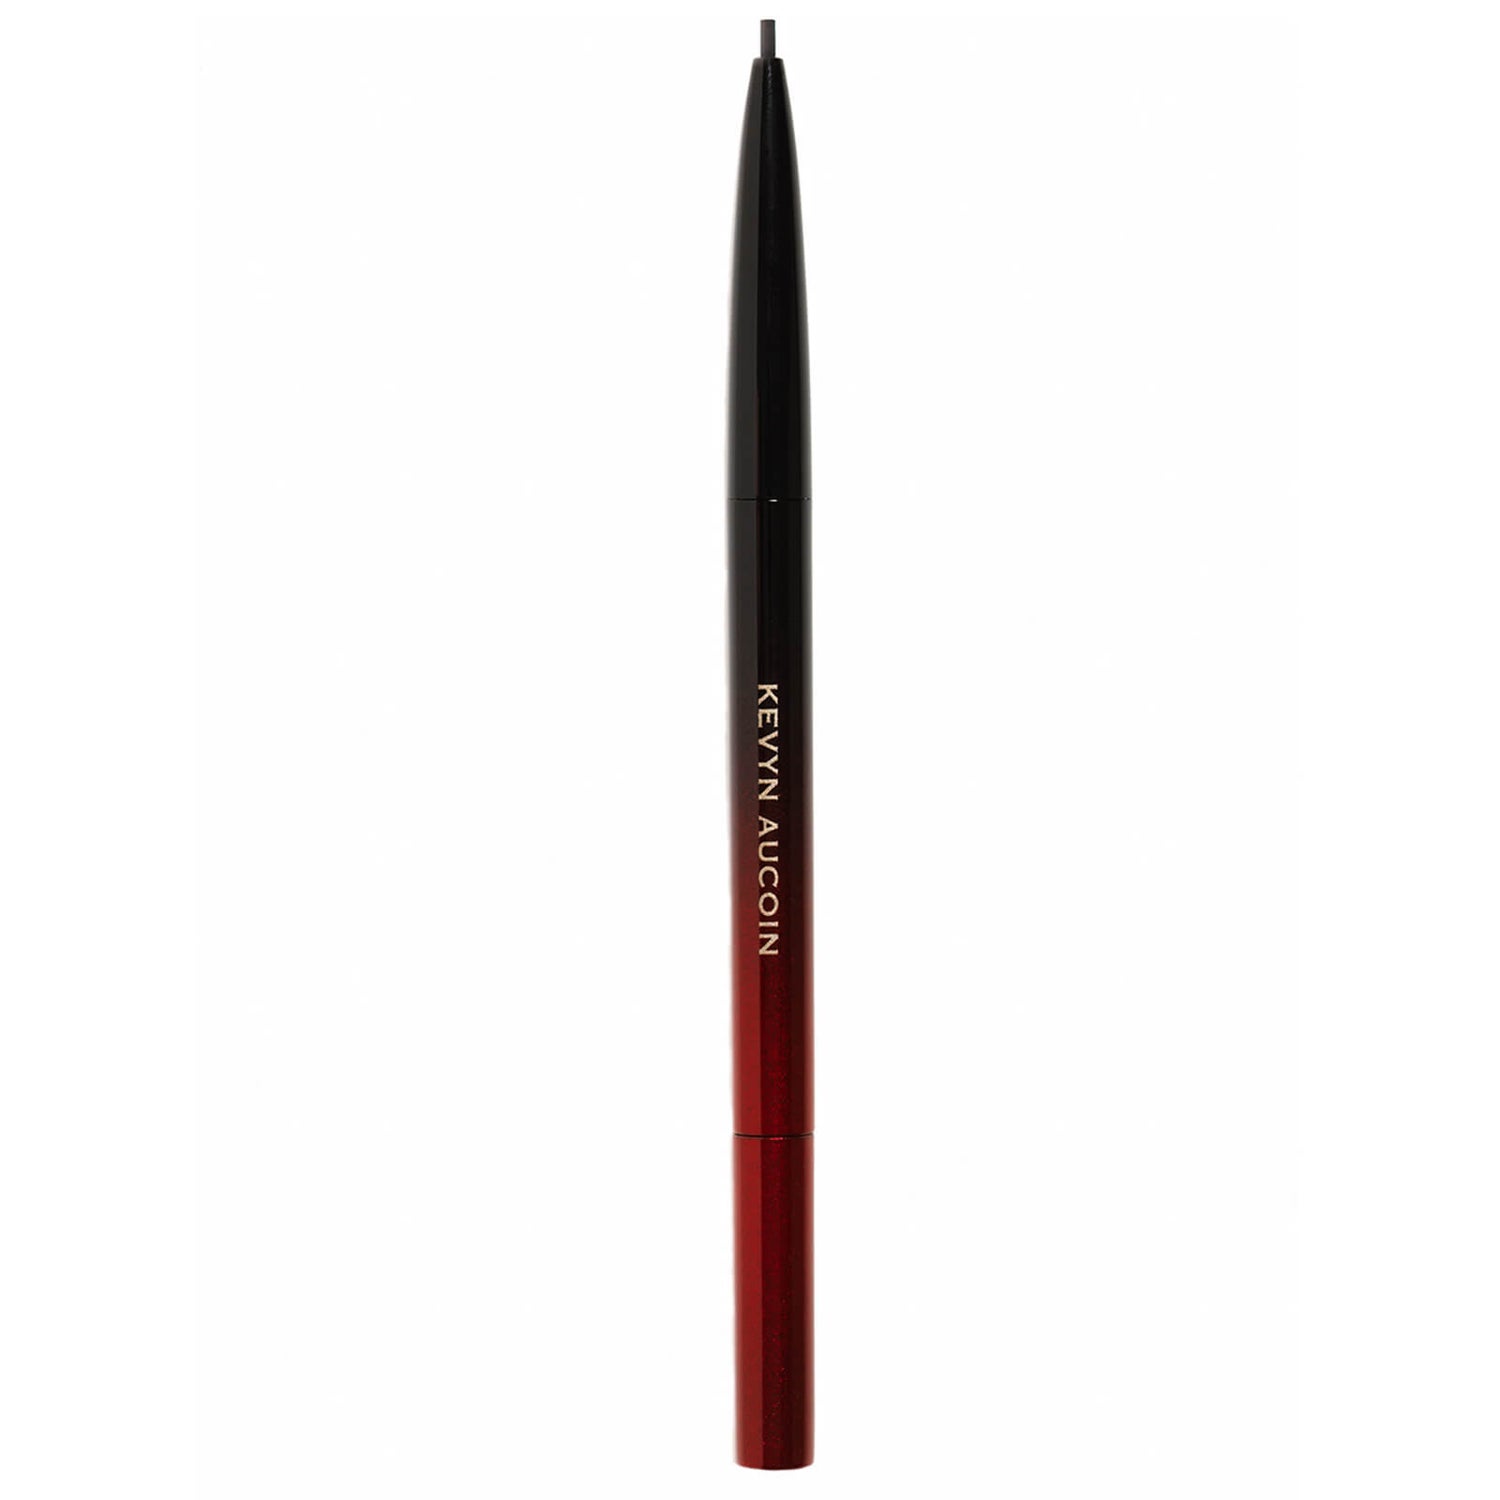 Kevyn Aucoin The Precision Brow Pencil (Various Shades) - Brunette